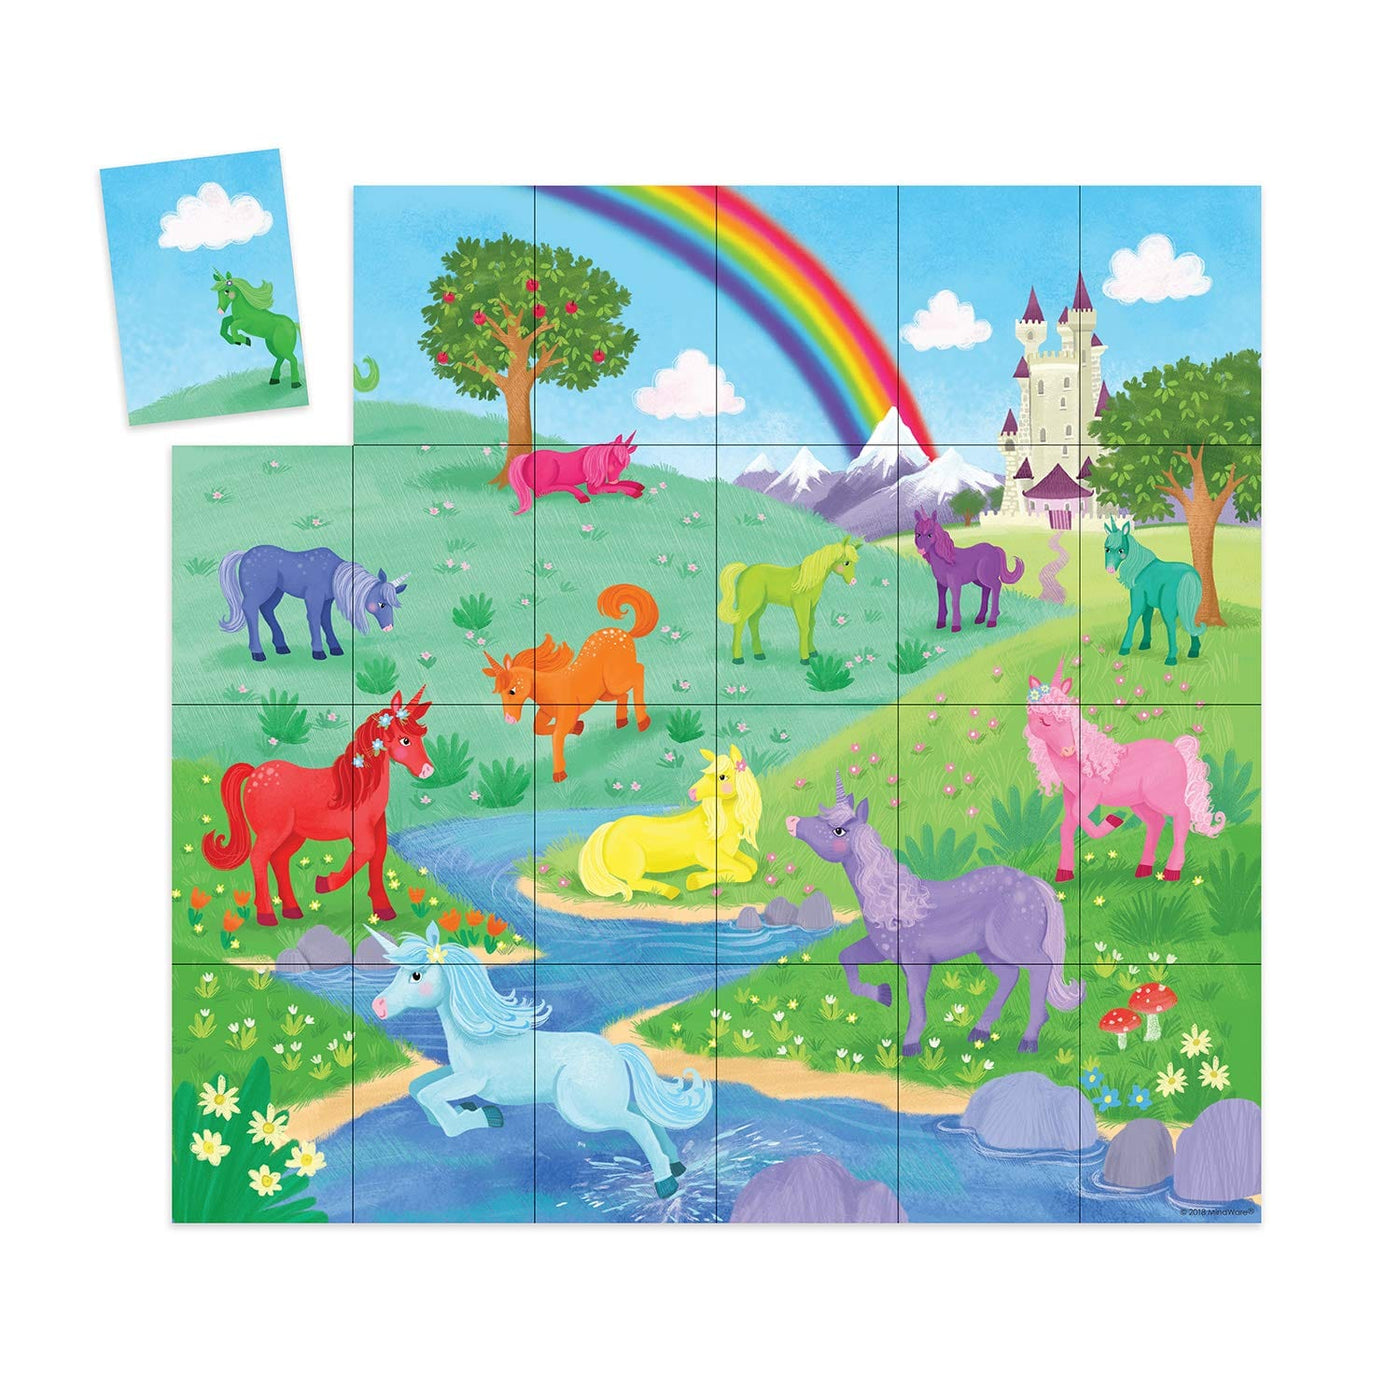 Unicorns Puzzle and Match Up Game by Peaceable Kingdom, USA Game